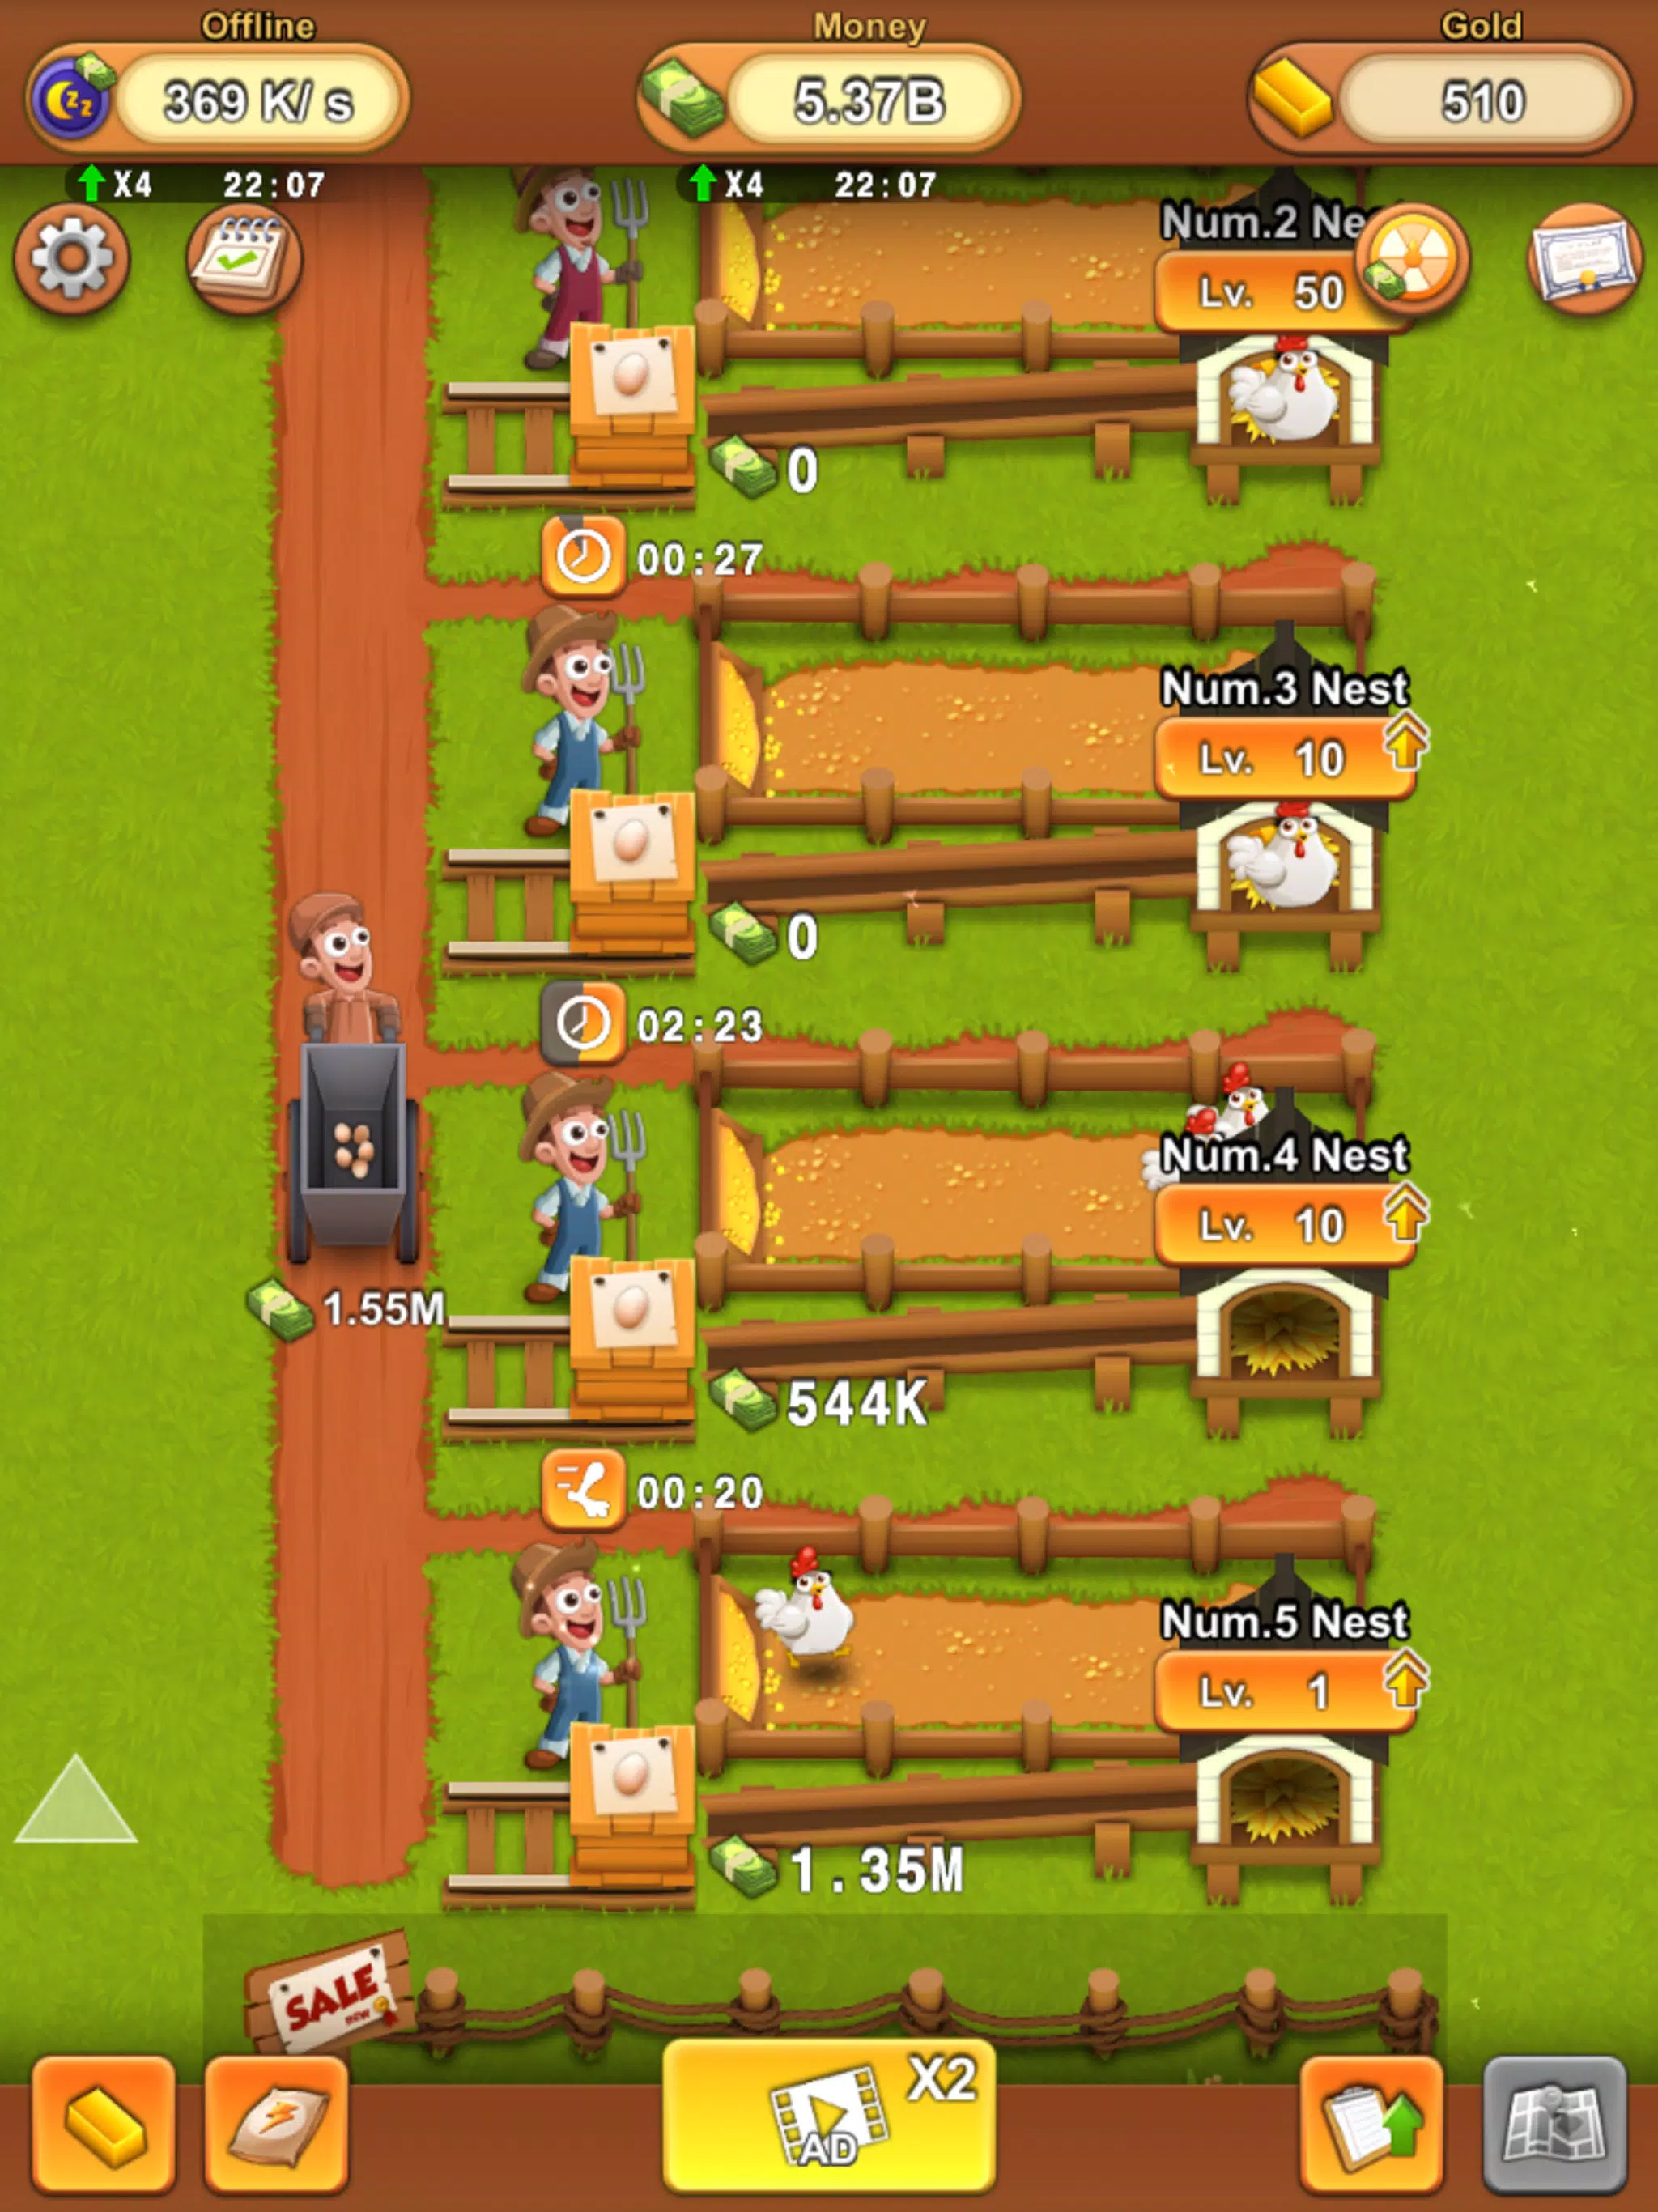 Idle Chicken for Android - APK Download